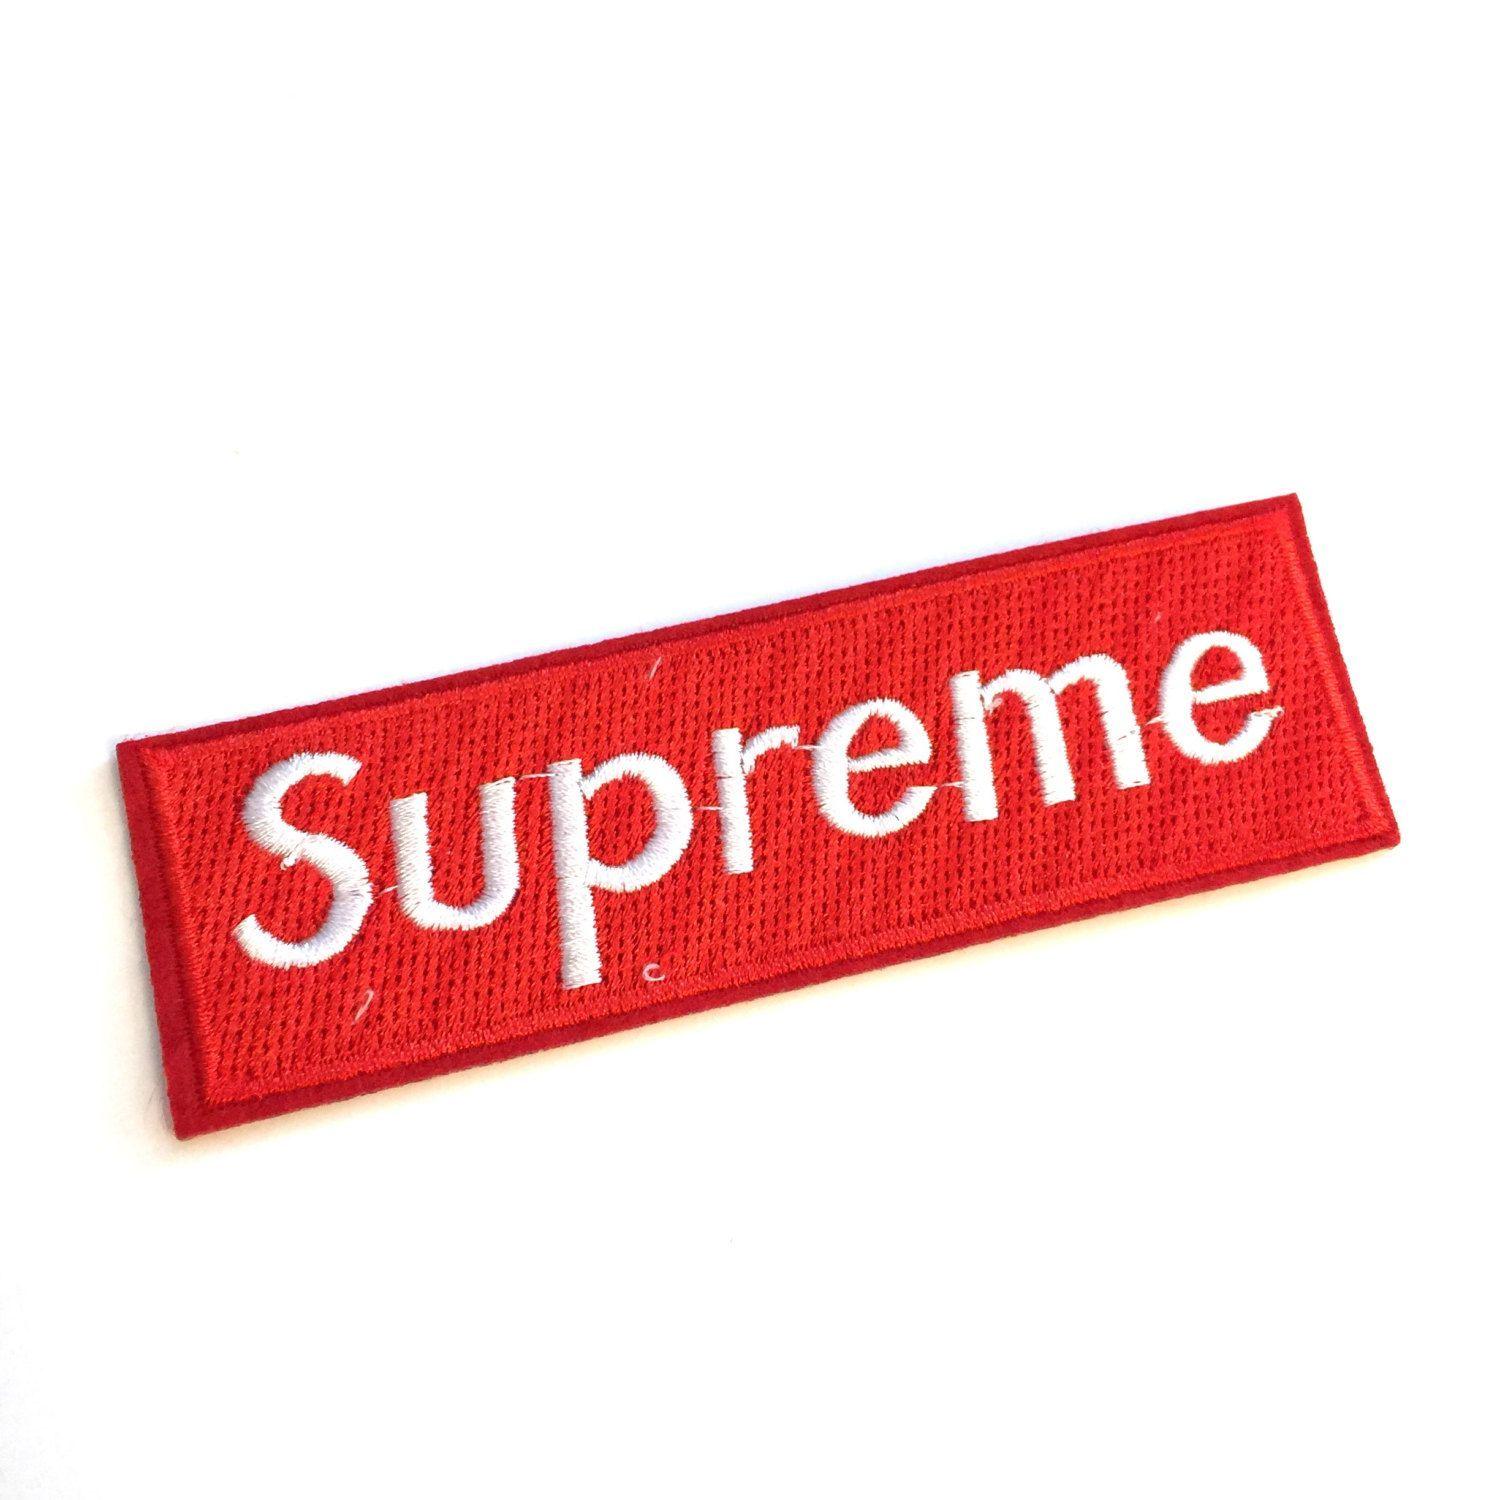 Supreme Apparel Logo - Red SUPREME Brand Logo Iron On Patches, New York Skate Style ...